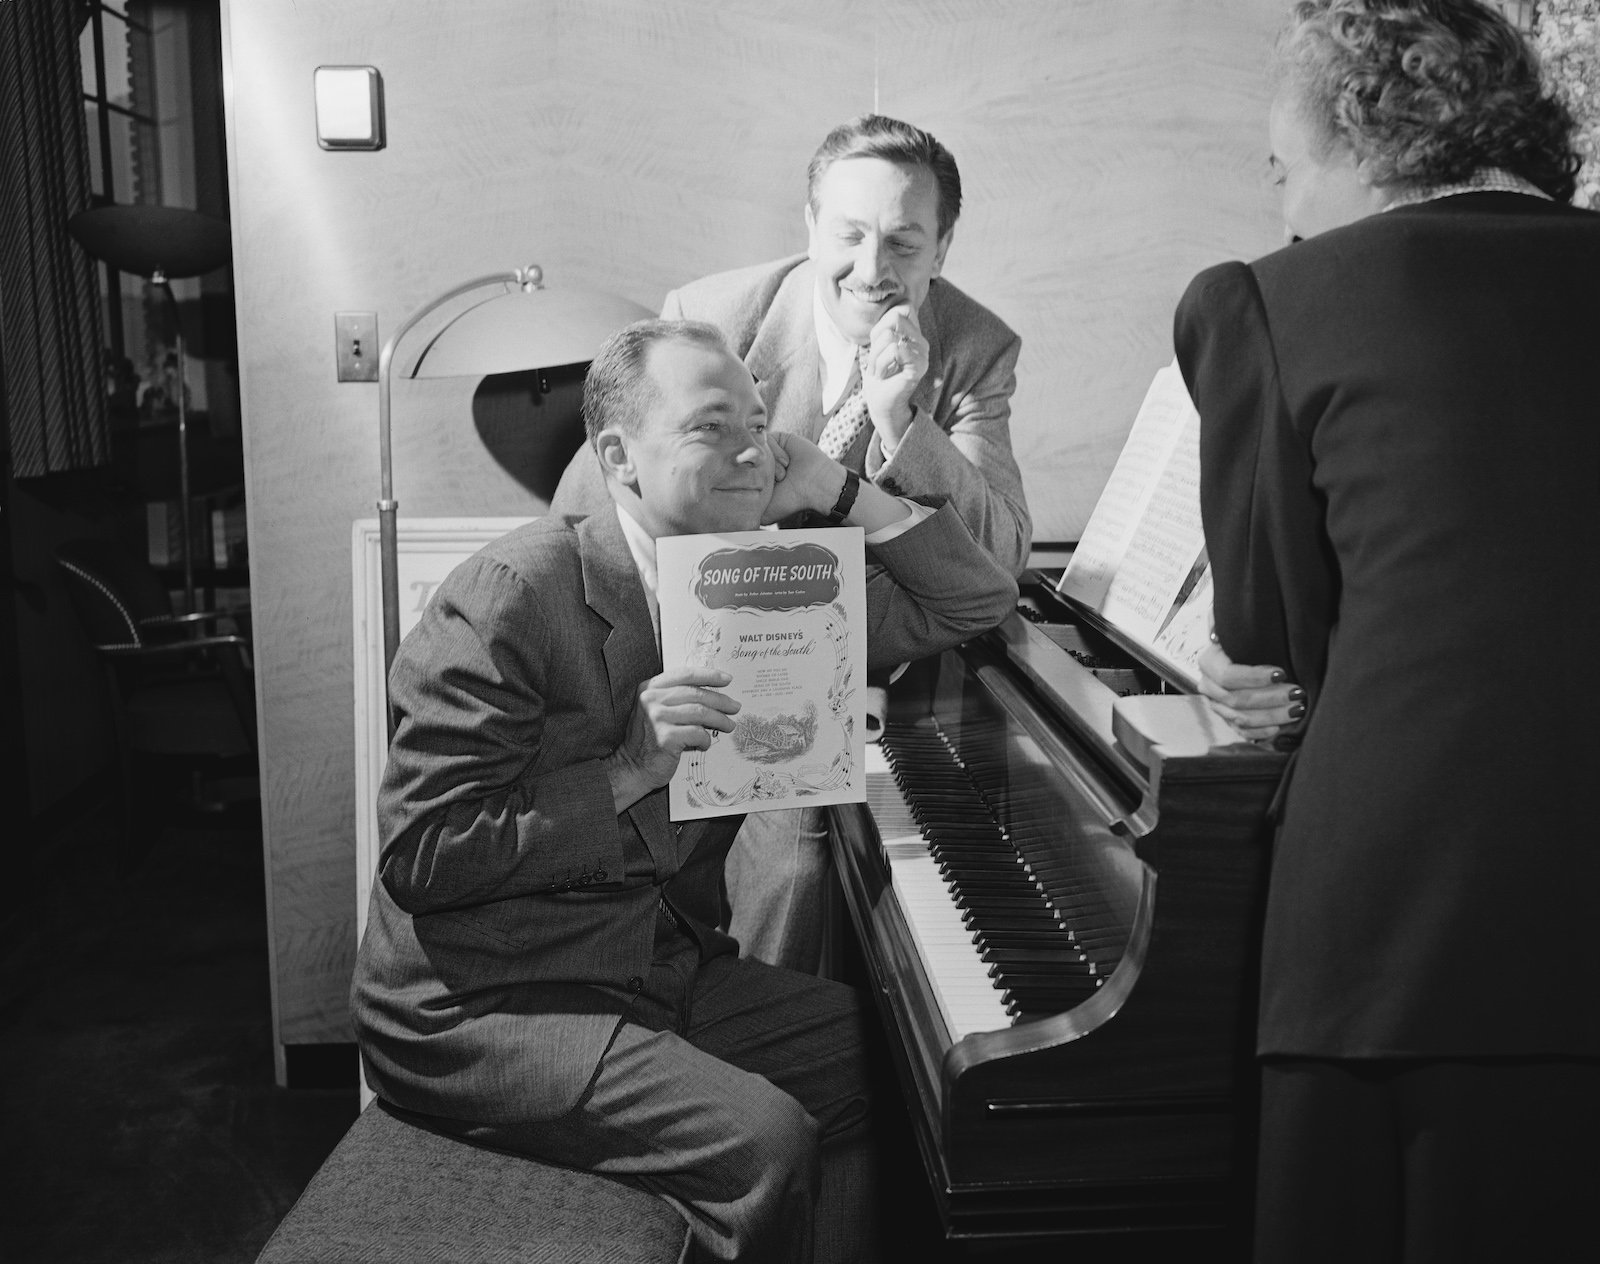 Walt Disney watched musician Johnny Mercer at the piano, as he holds up the sheet music from Disney's 'Song of the South' movie, October 28, 1946.